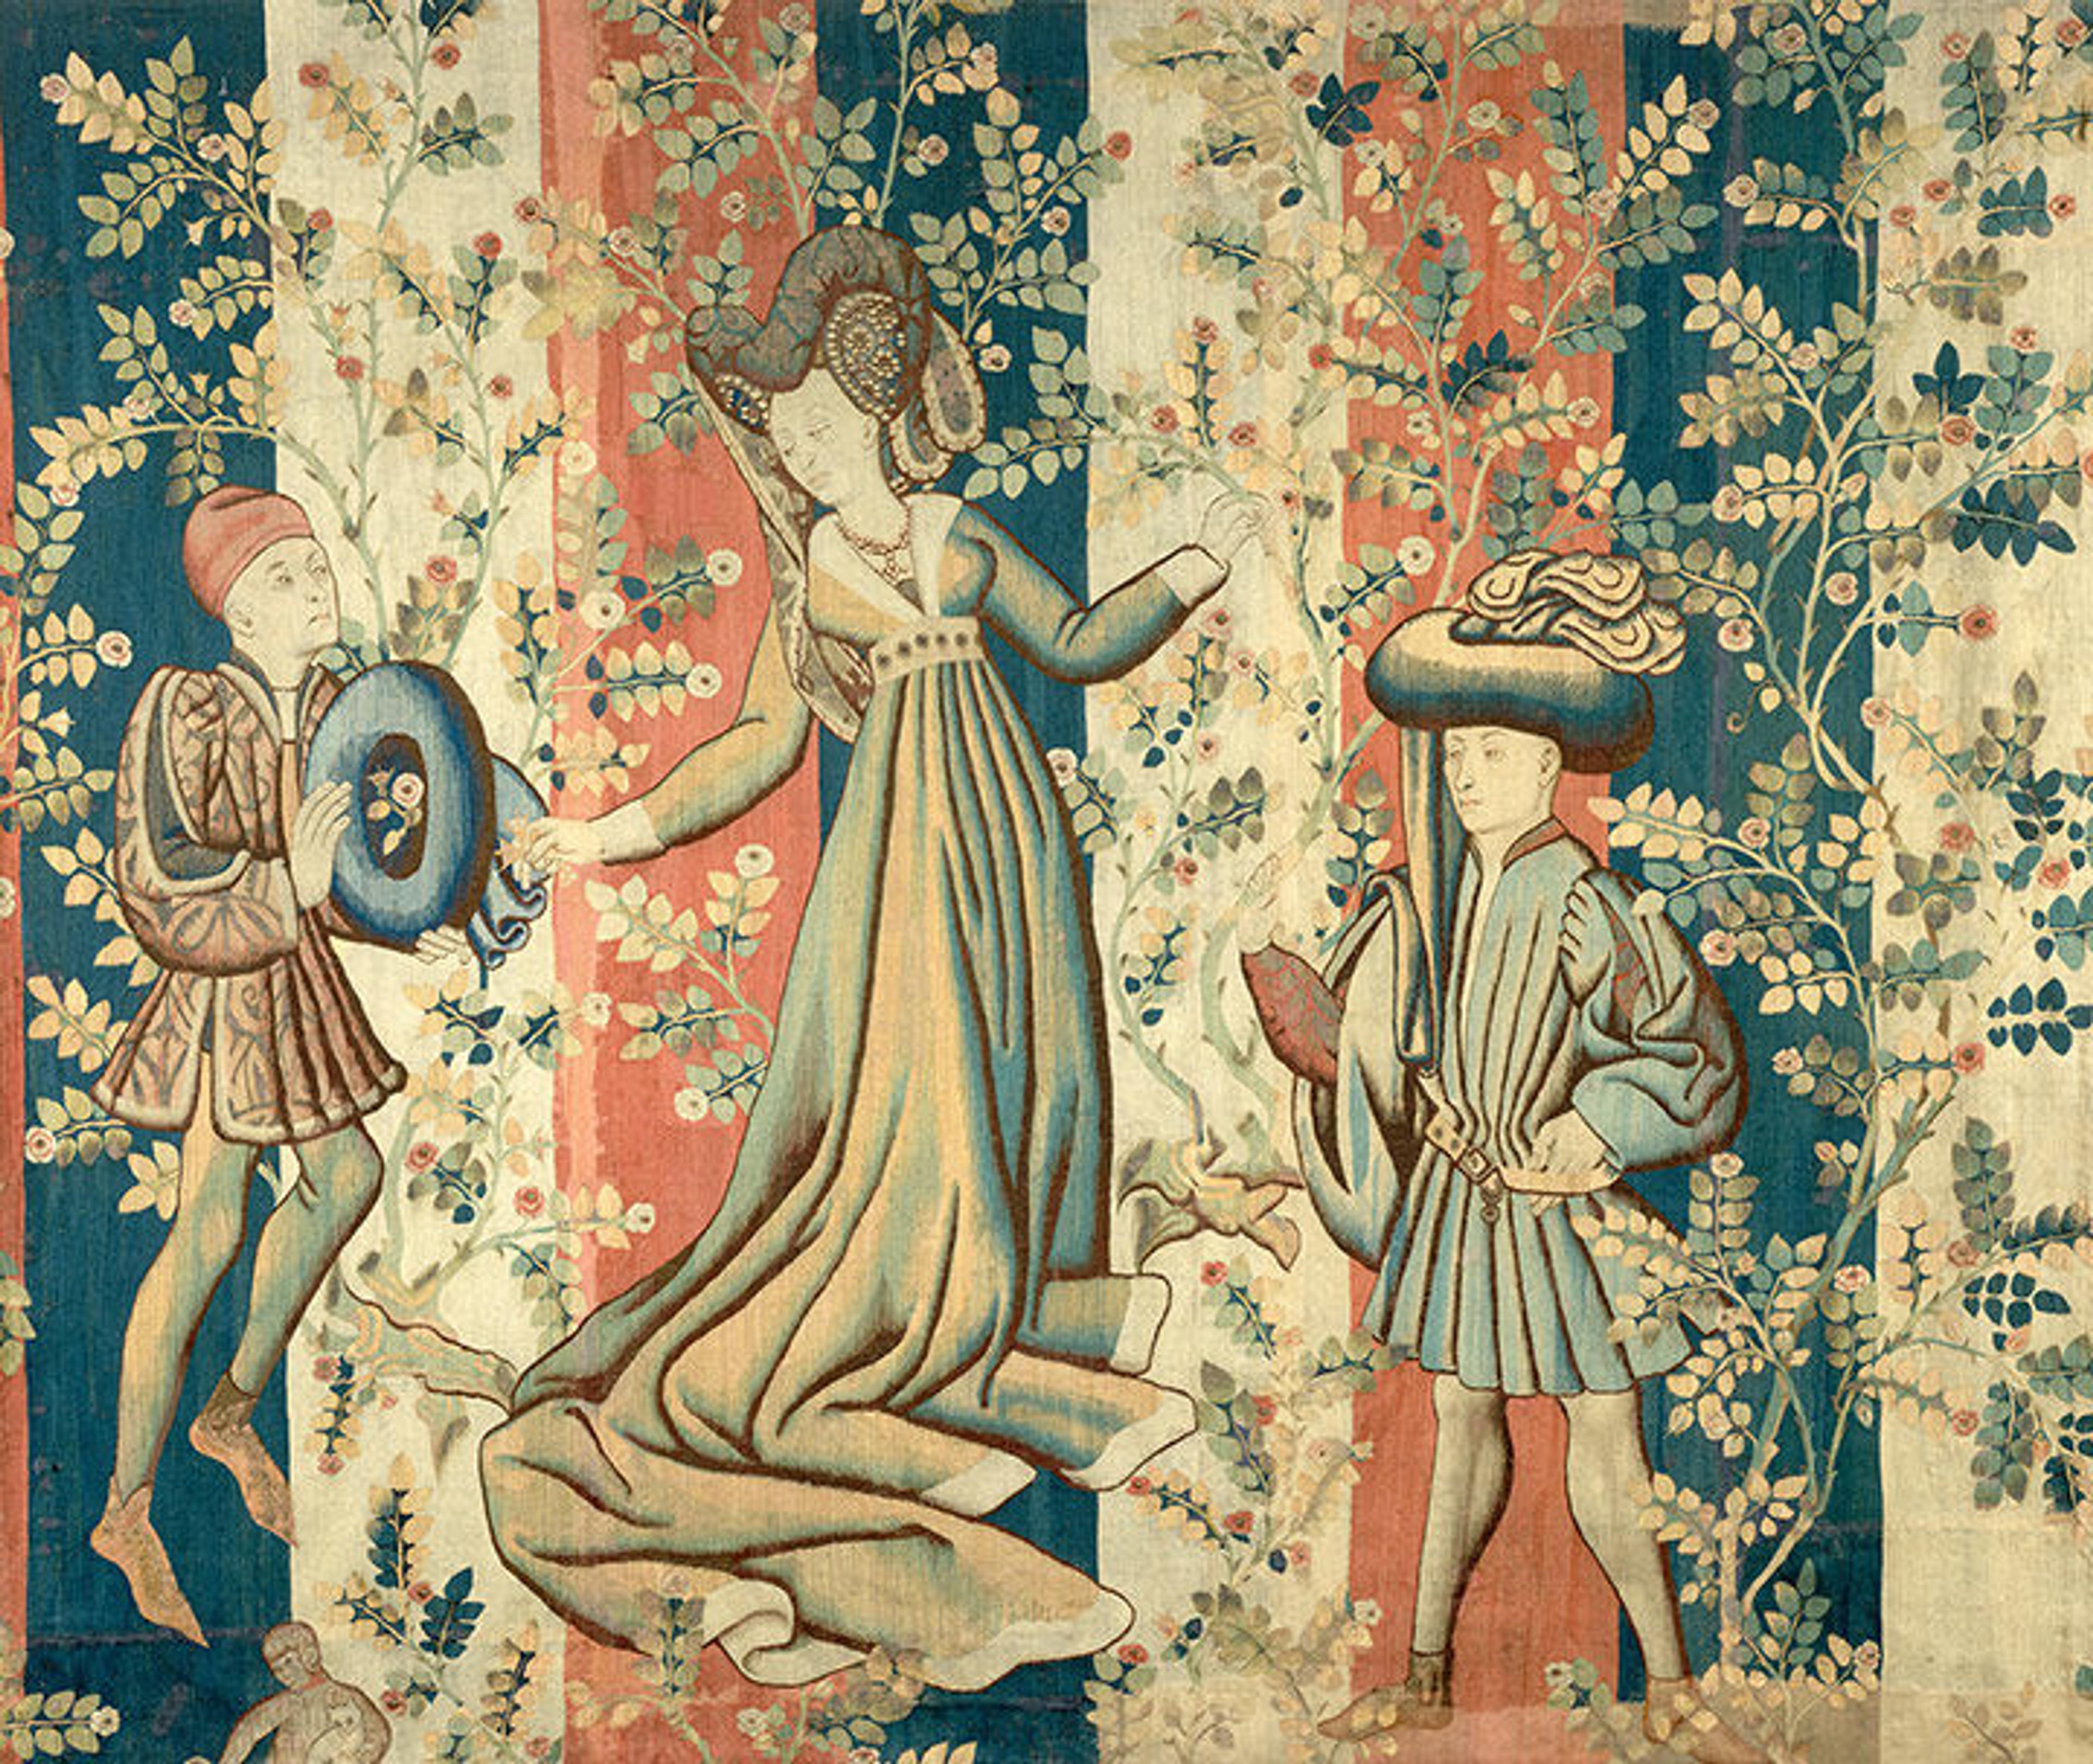 Tapestry of Courtiers in a Rose Garden: A Lady and Two Gentlemen